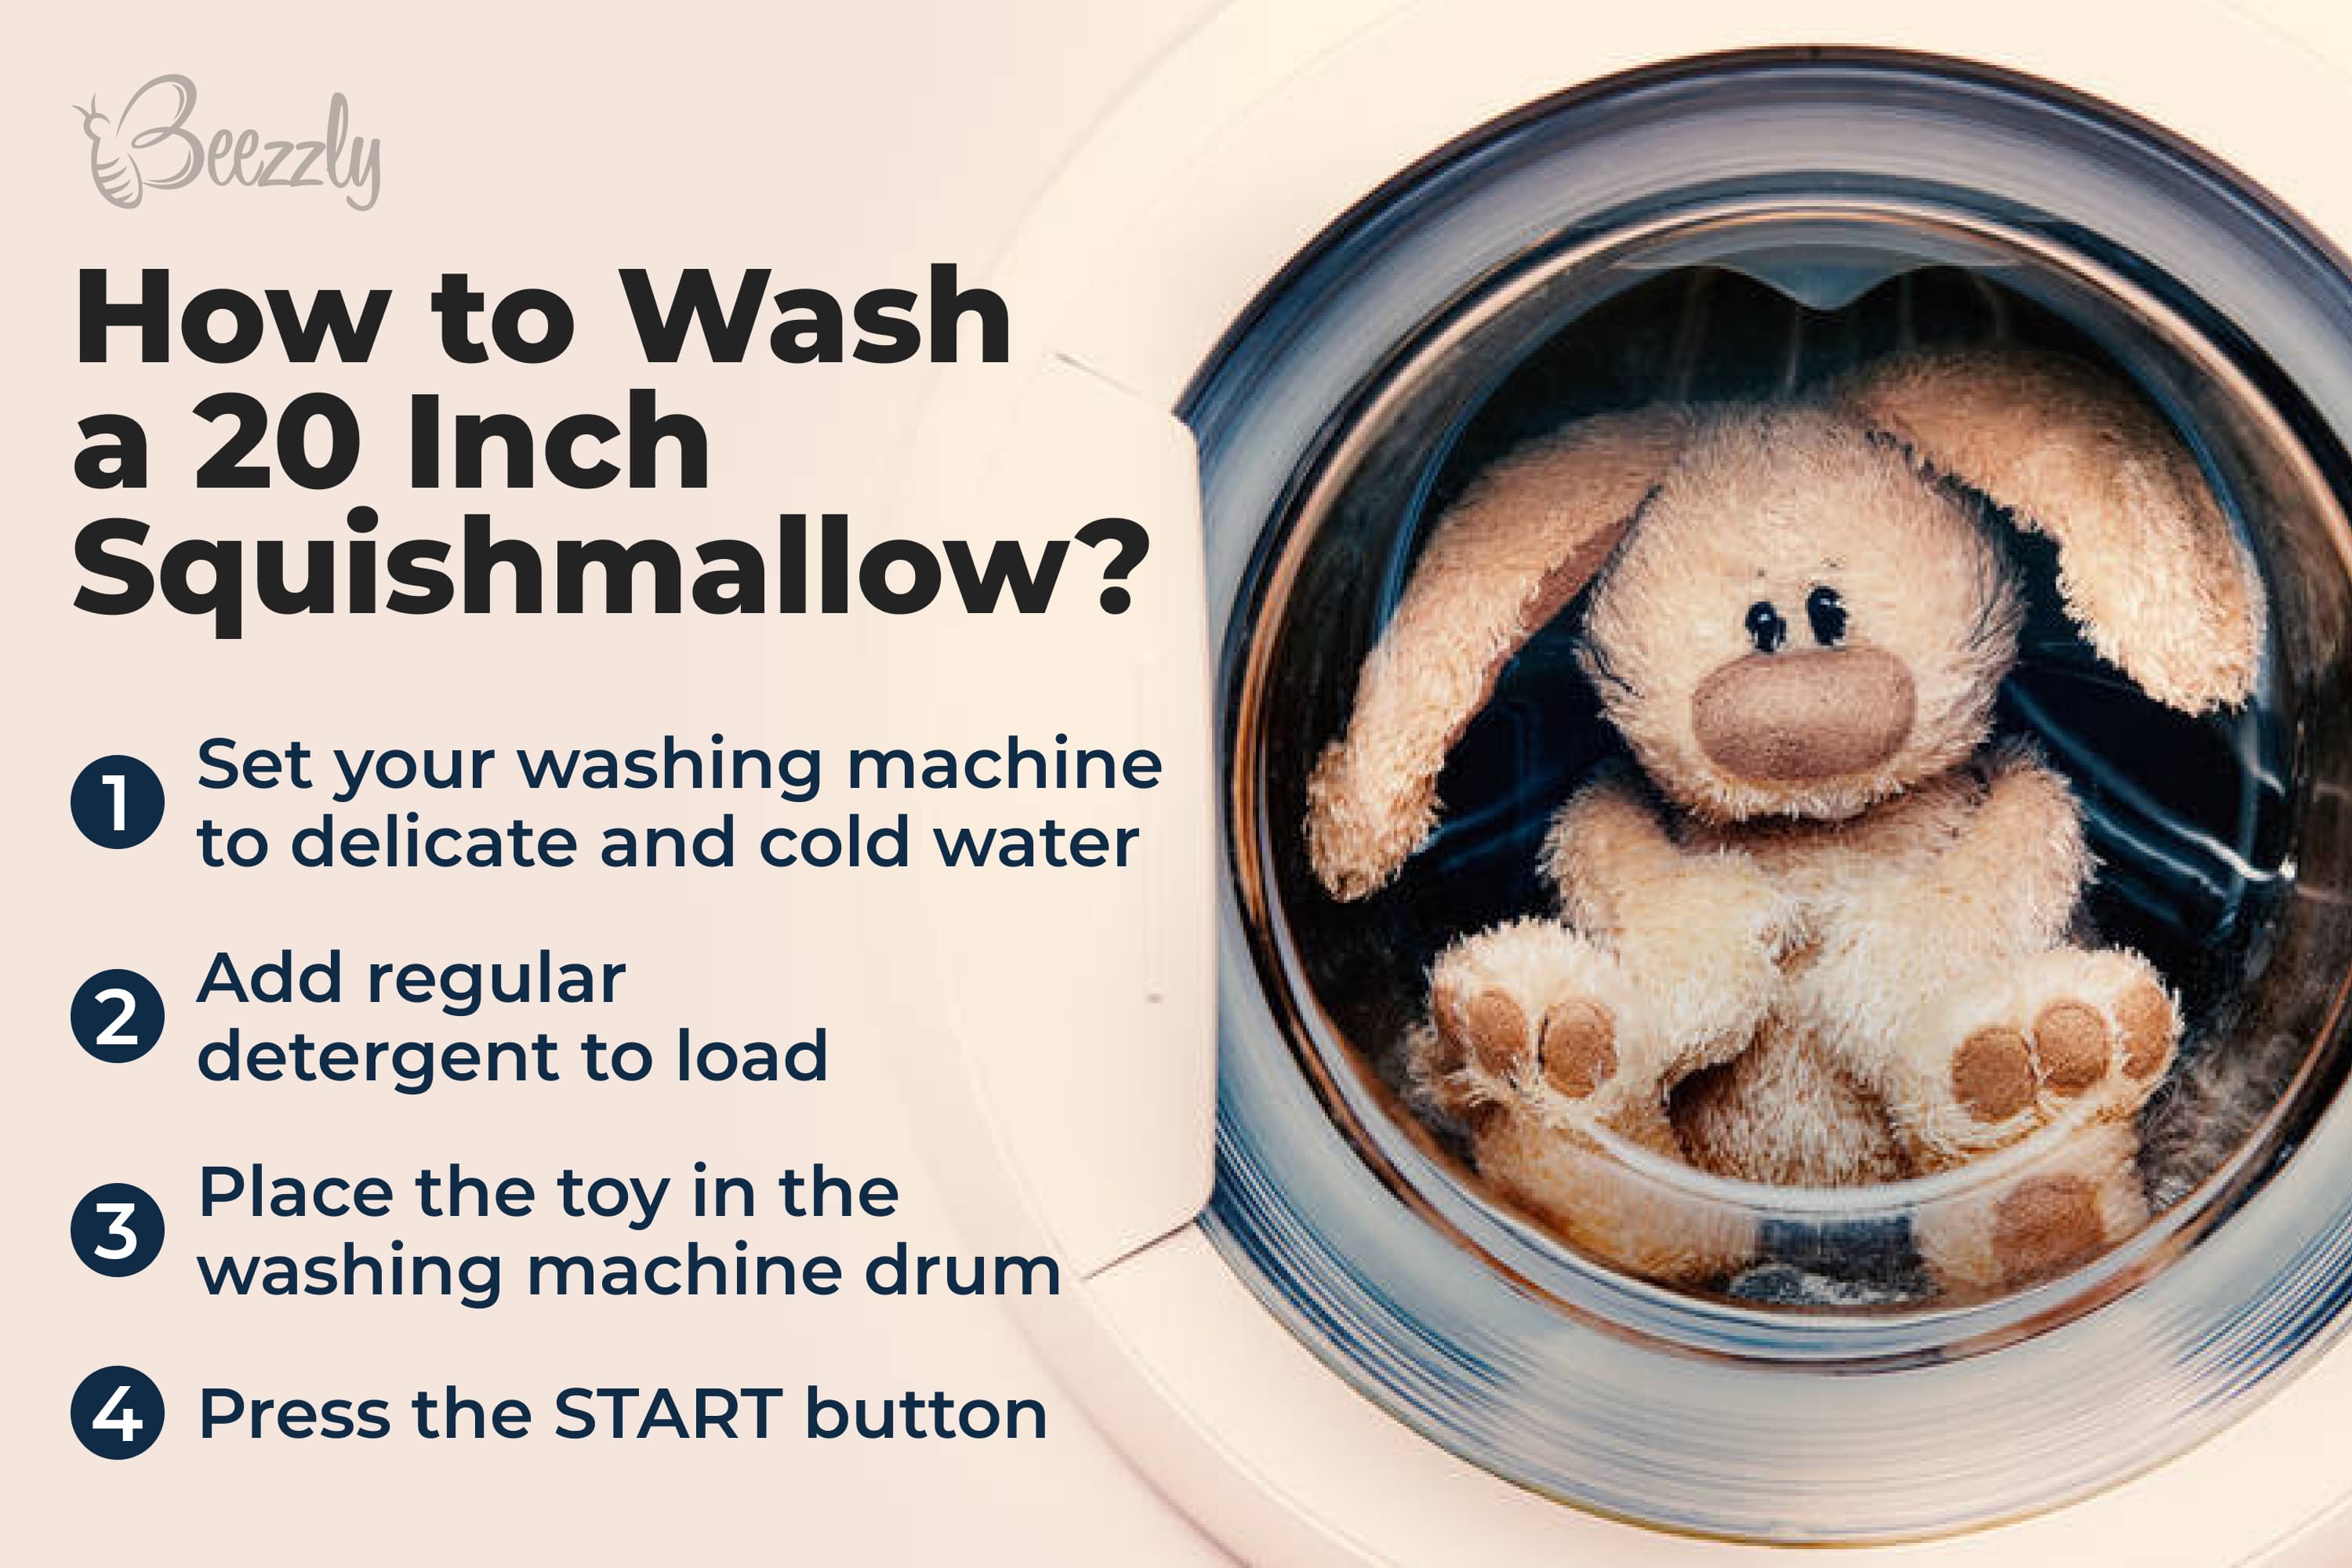 How to wash a 20 inch Squishmallow